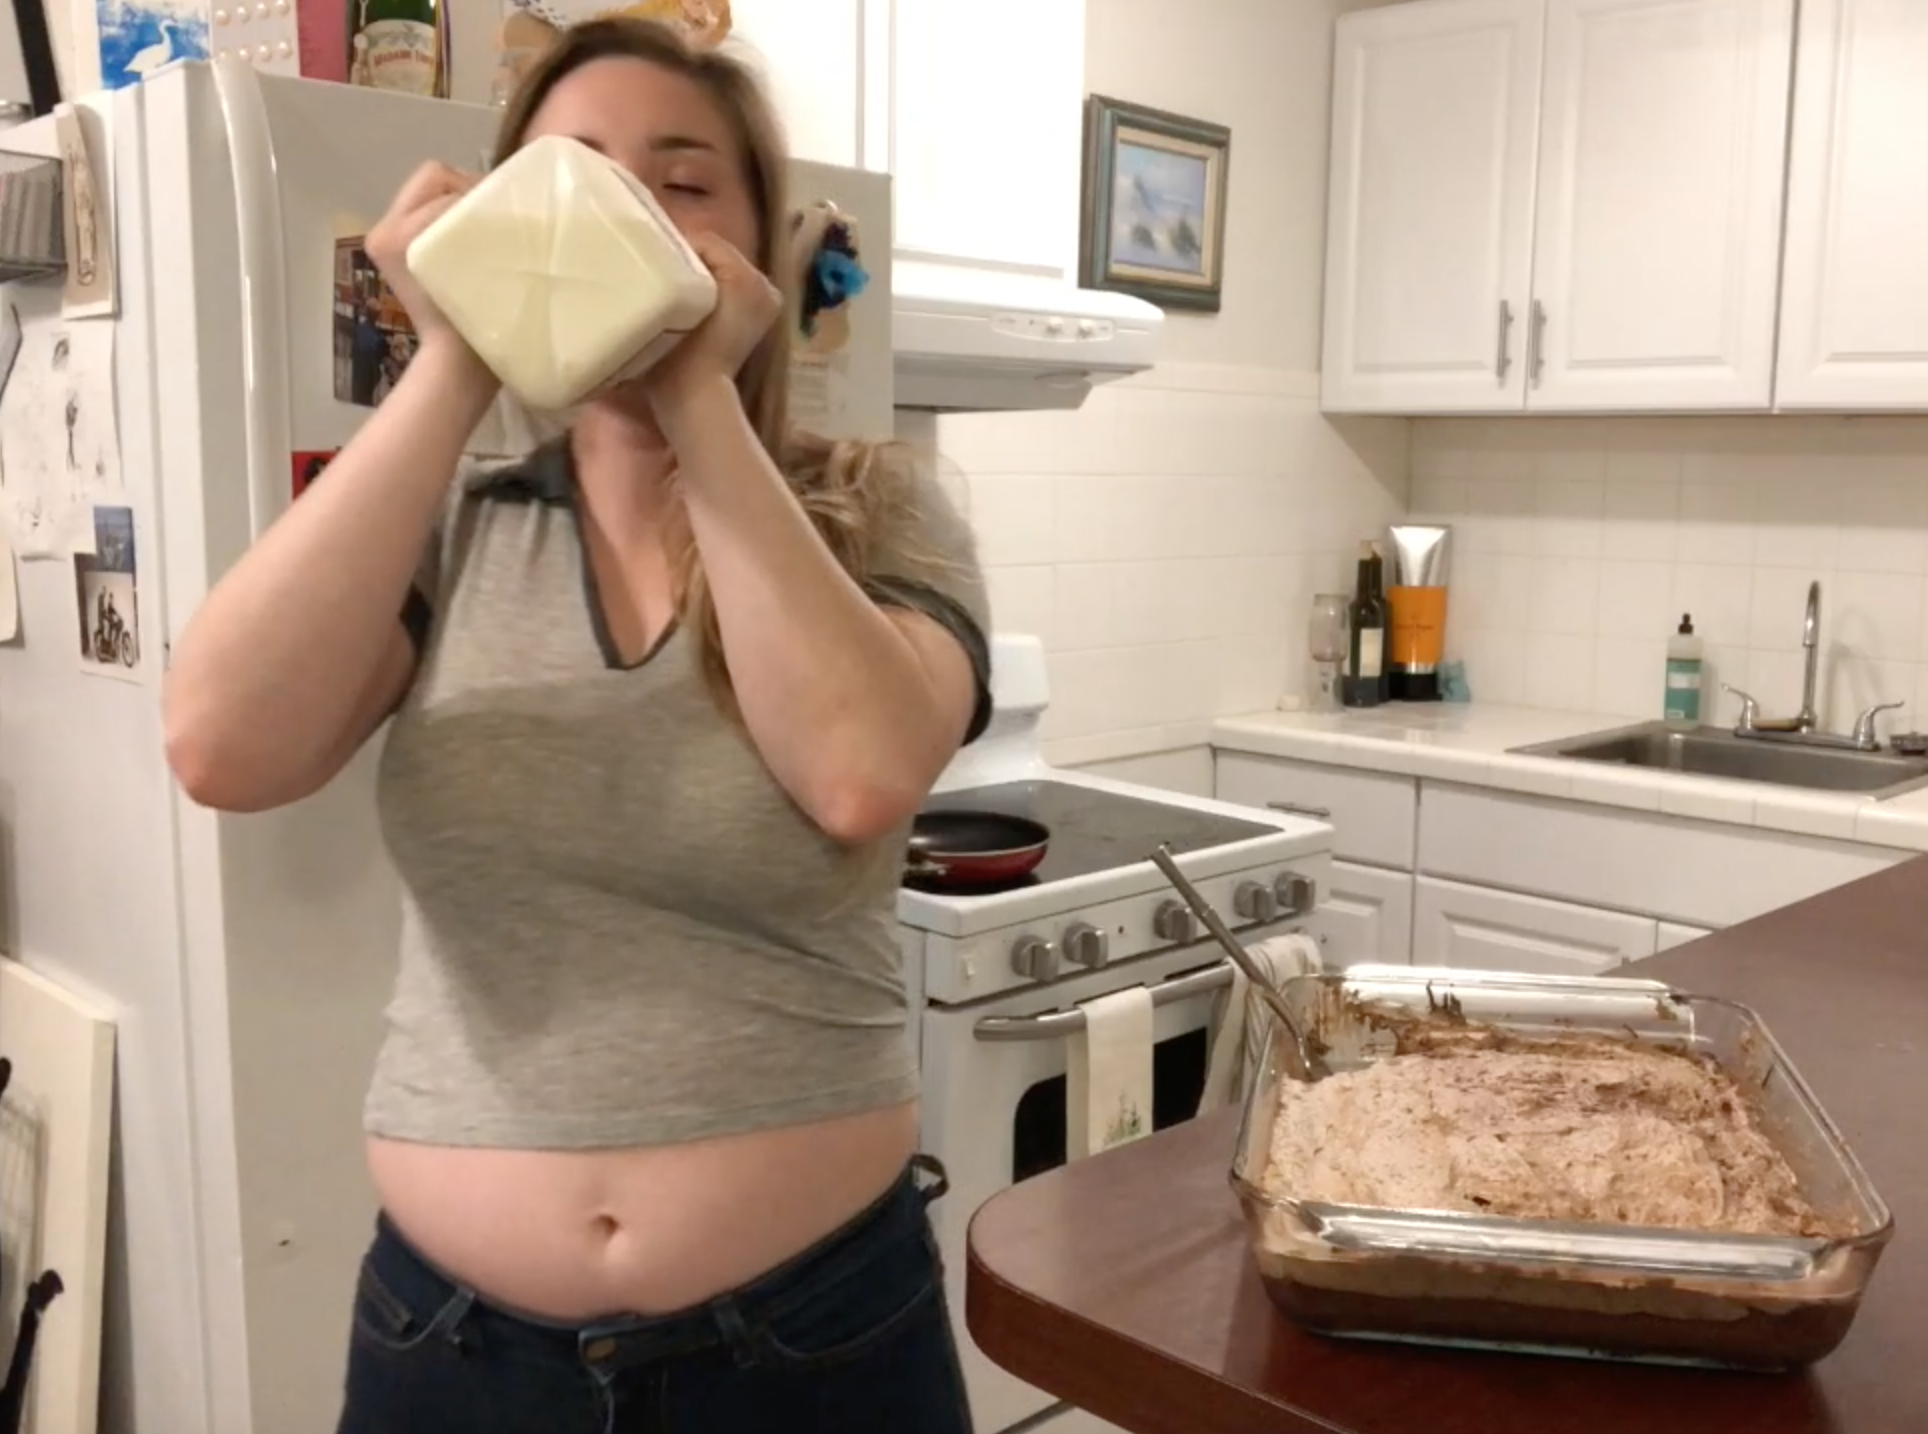 goodgirlgrow:https://curvage.org/forum/index.php?/files/file/6156-ggg-eats-her-feeders-b-day-cake-without-him-cake-stuffing-and-milk-chug/GGG Eats Her Feeder’s B-Day Cake (Without Him!): Cake Stuffing and Milk Chug